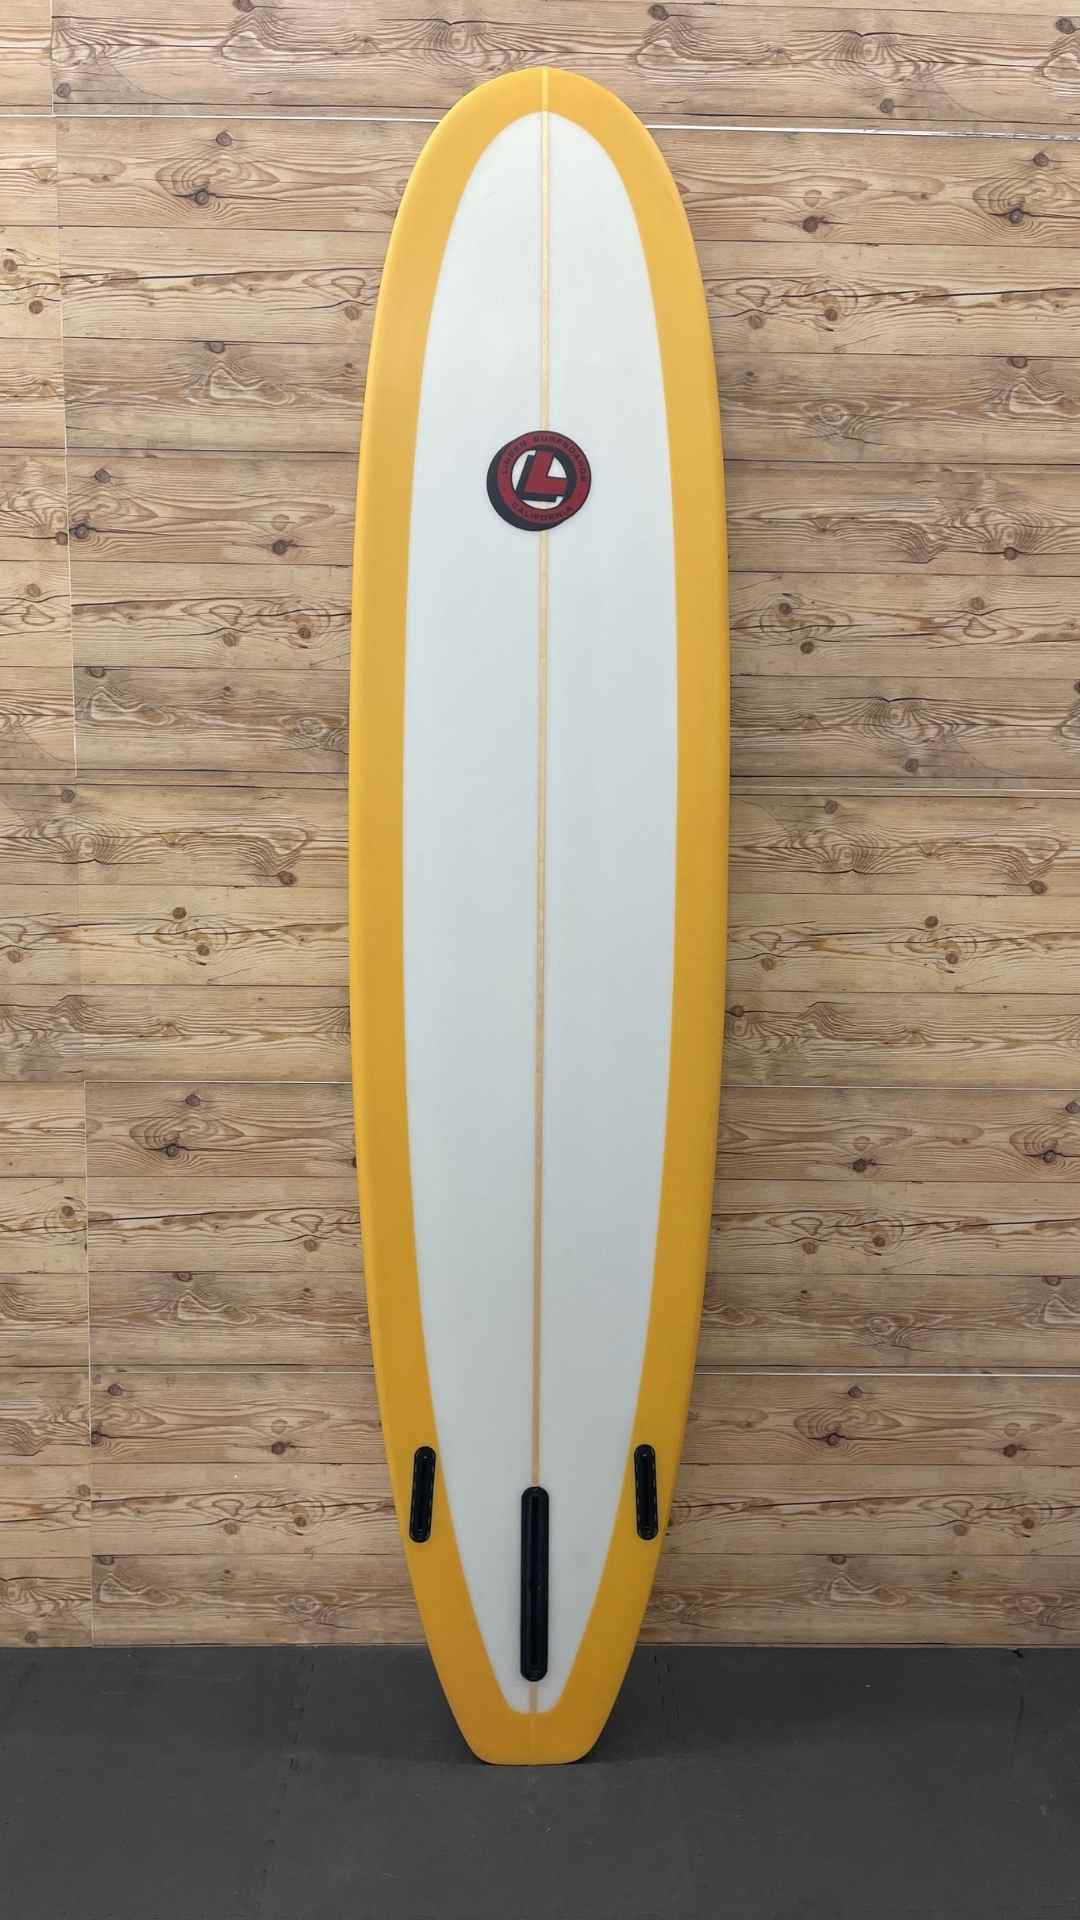 Gary Linden Funboard 8'6"